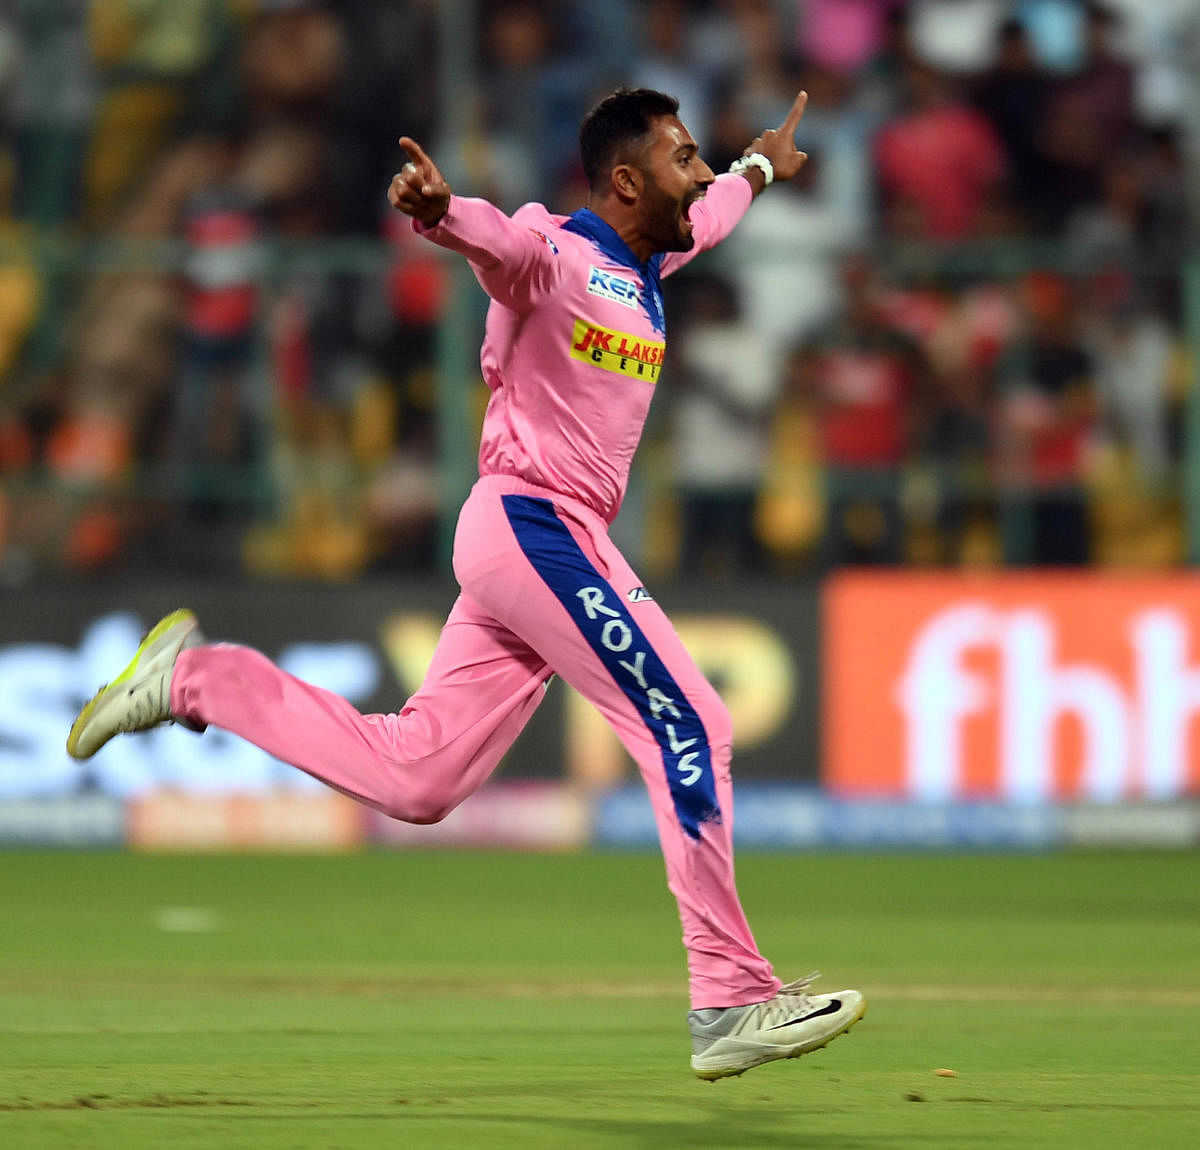 ON CLOUD NINE: Rajasthan Royals’ Shreyas Gopal celebrates after bagging a hatrick against Royal Challengers Bangalore in their IPL game at the Chinnaswamy stadium in Bengaluru on Tuesday. DH Photo/Srikanta Sharma R